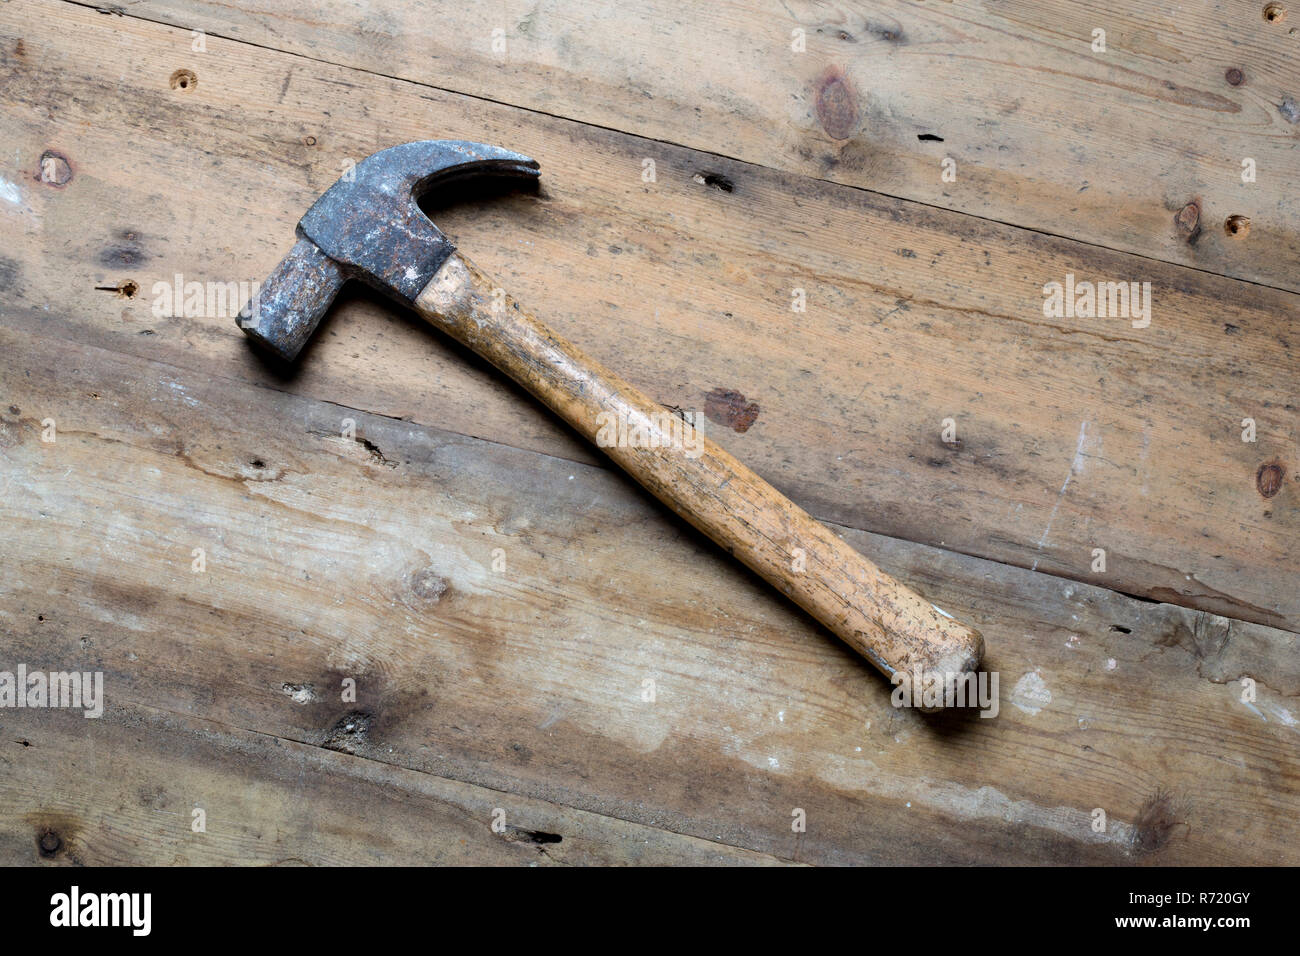 A wooden handled claw hammer on a rough wood surface. Stock Photo